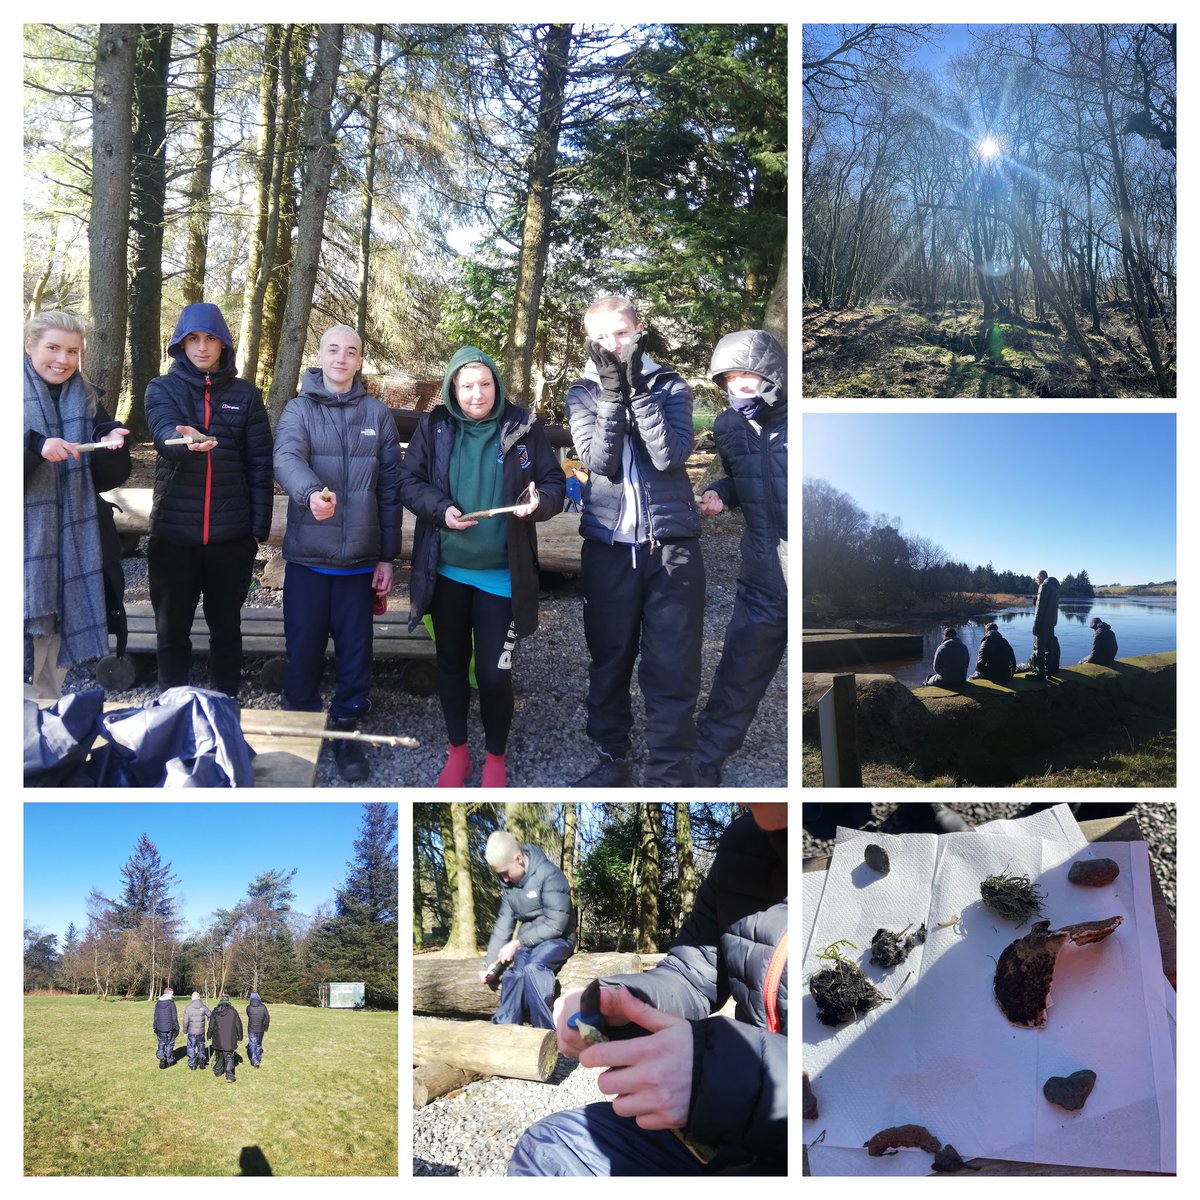 A 'belter' of a day with @GlenifferHigh and @scotforestry delivering the Scottish Junior Forester Award. #newskills #sunshine #owlpellets #workinforestry